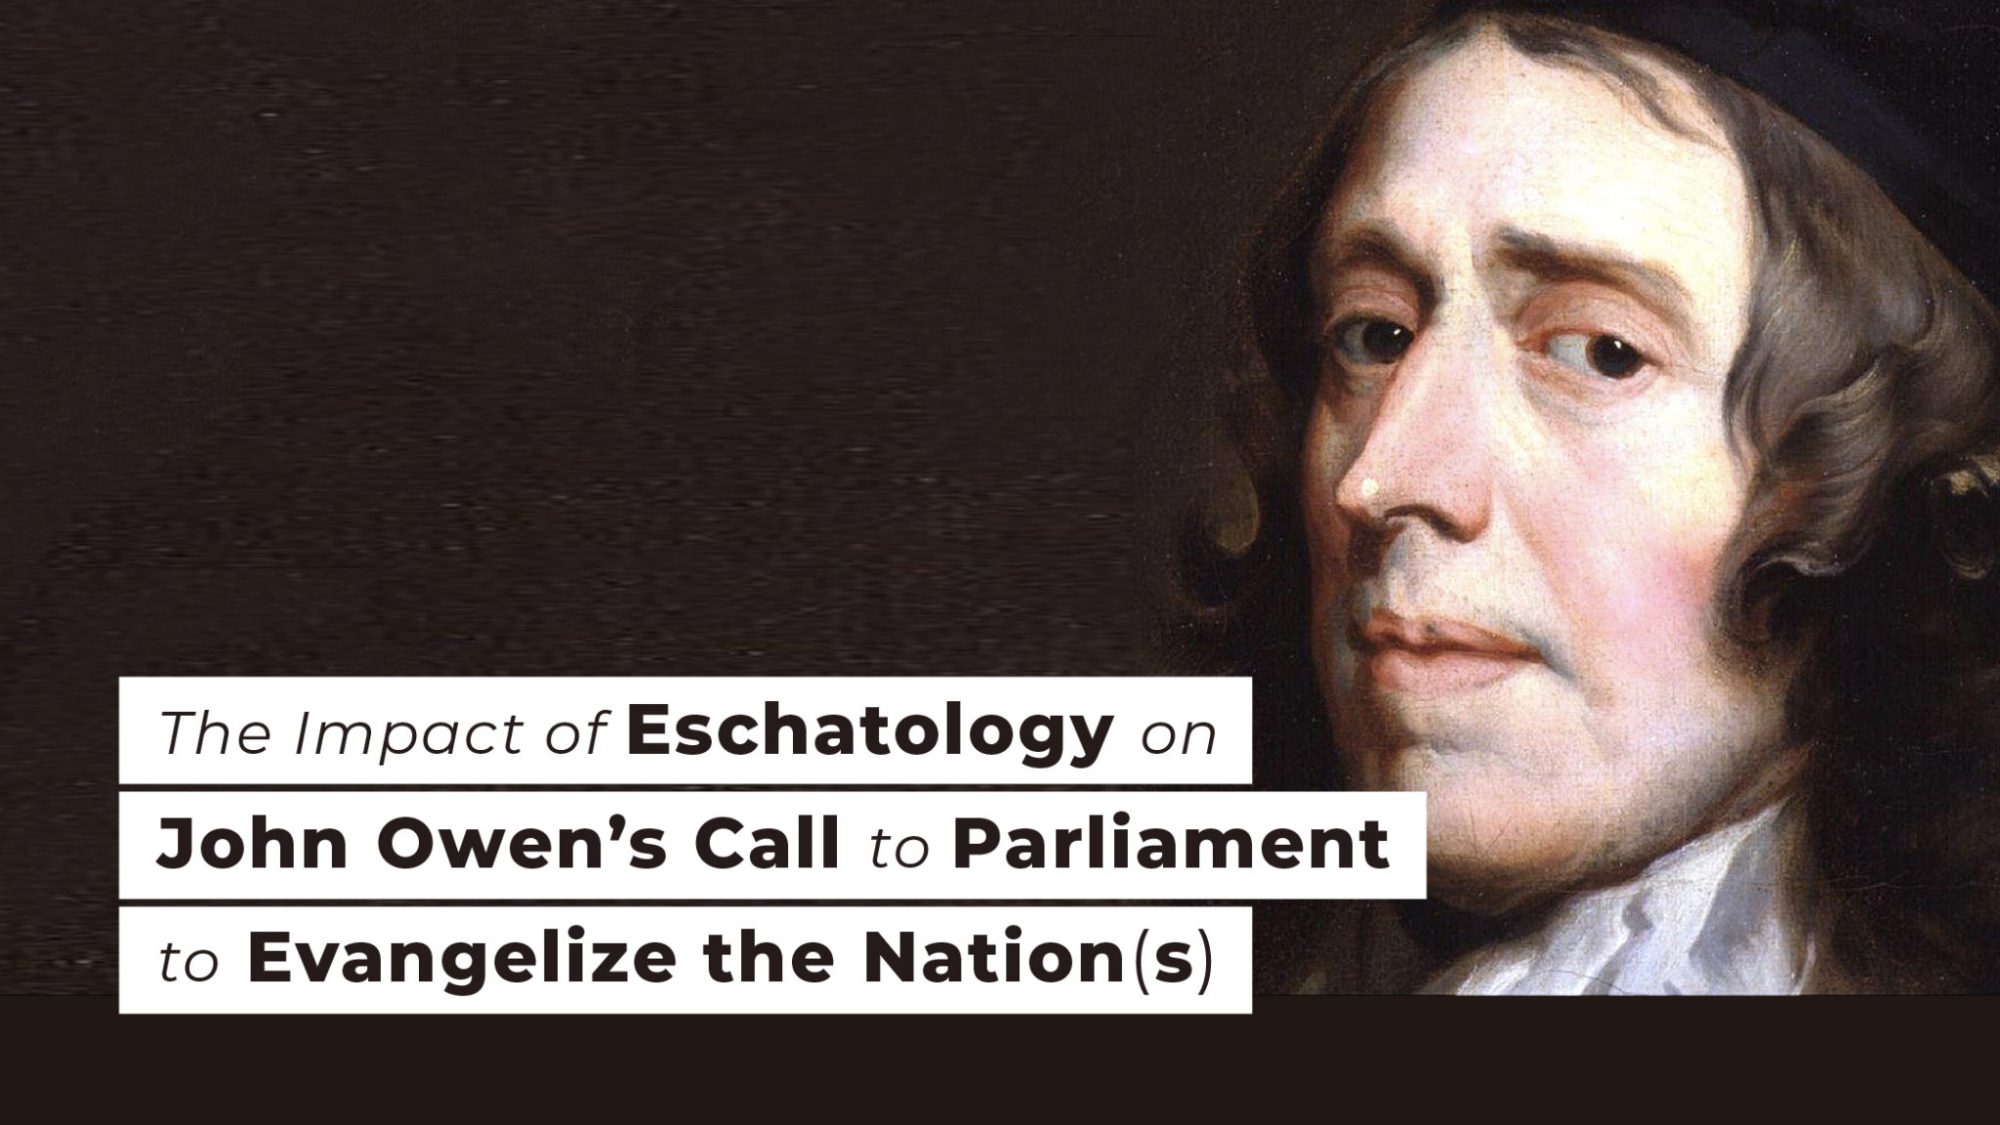 The Impact of Eschatology on John Owen’s Call to Parliament to Evangelize the Nation(s)